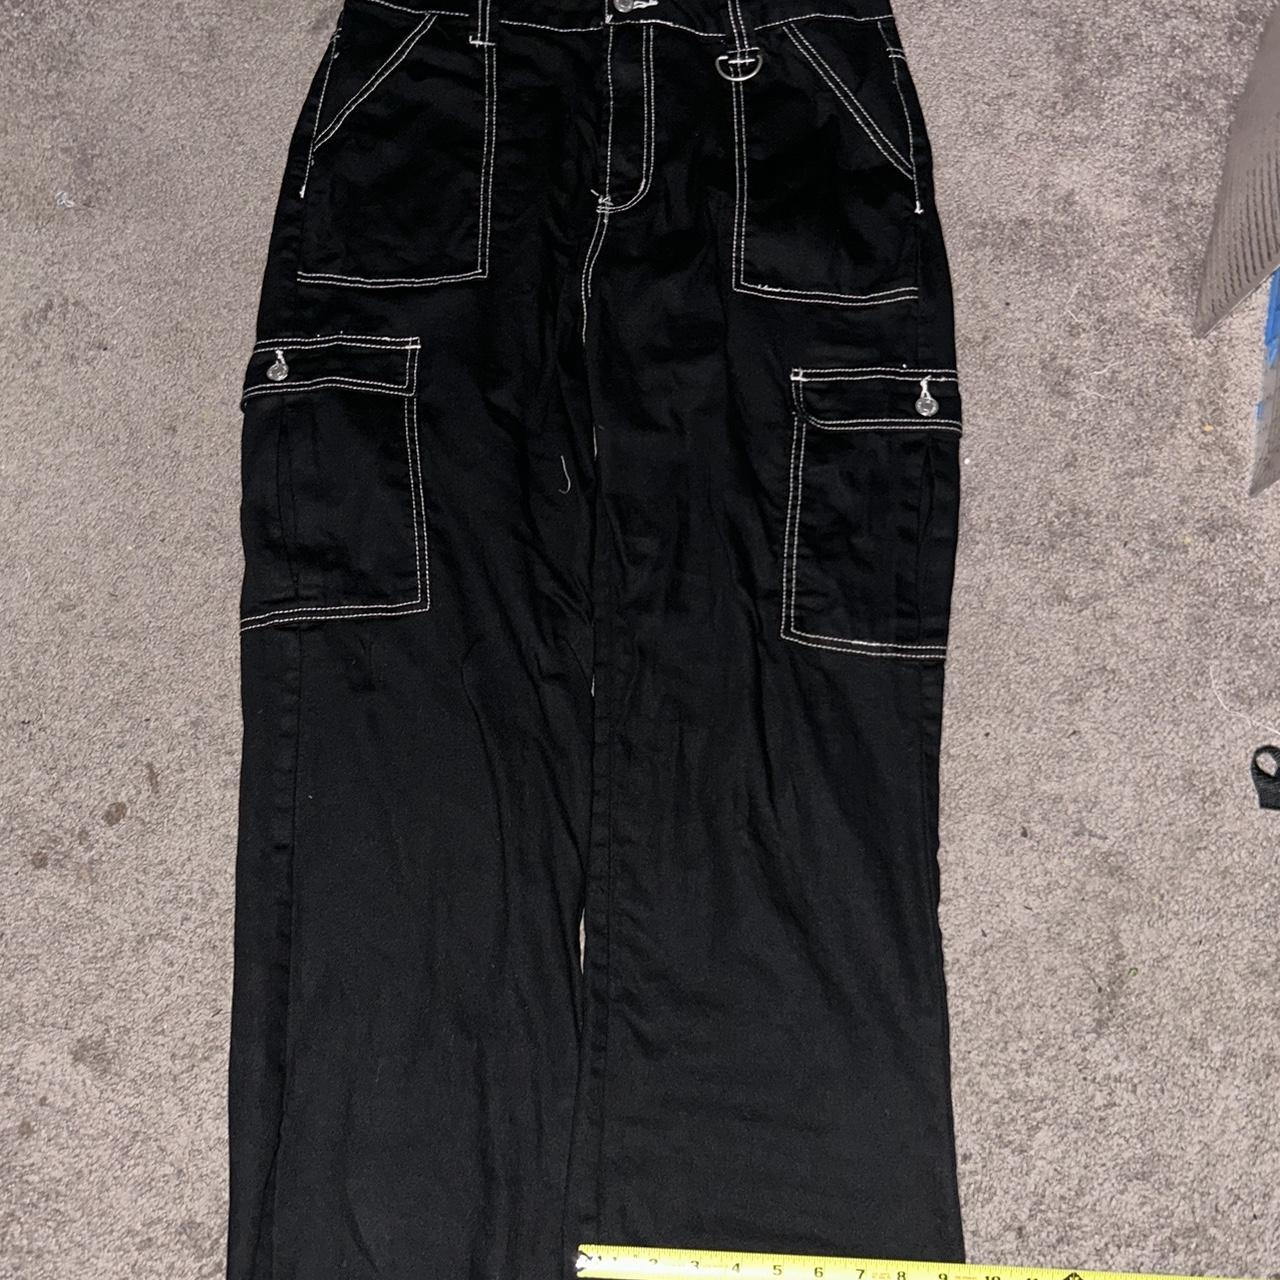 Baggy black cargo pants 33/33 cut to 33/30 with a... - Depop